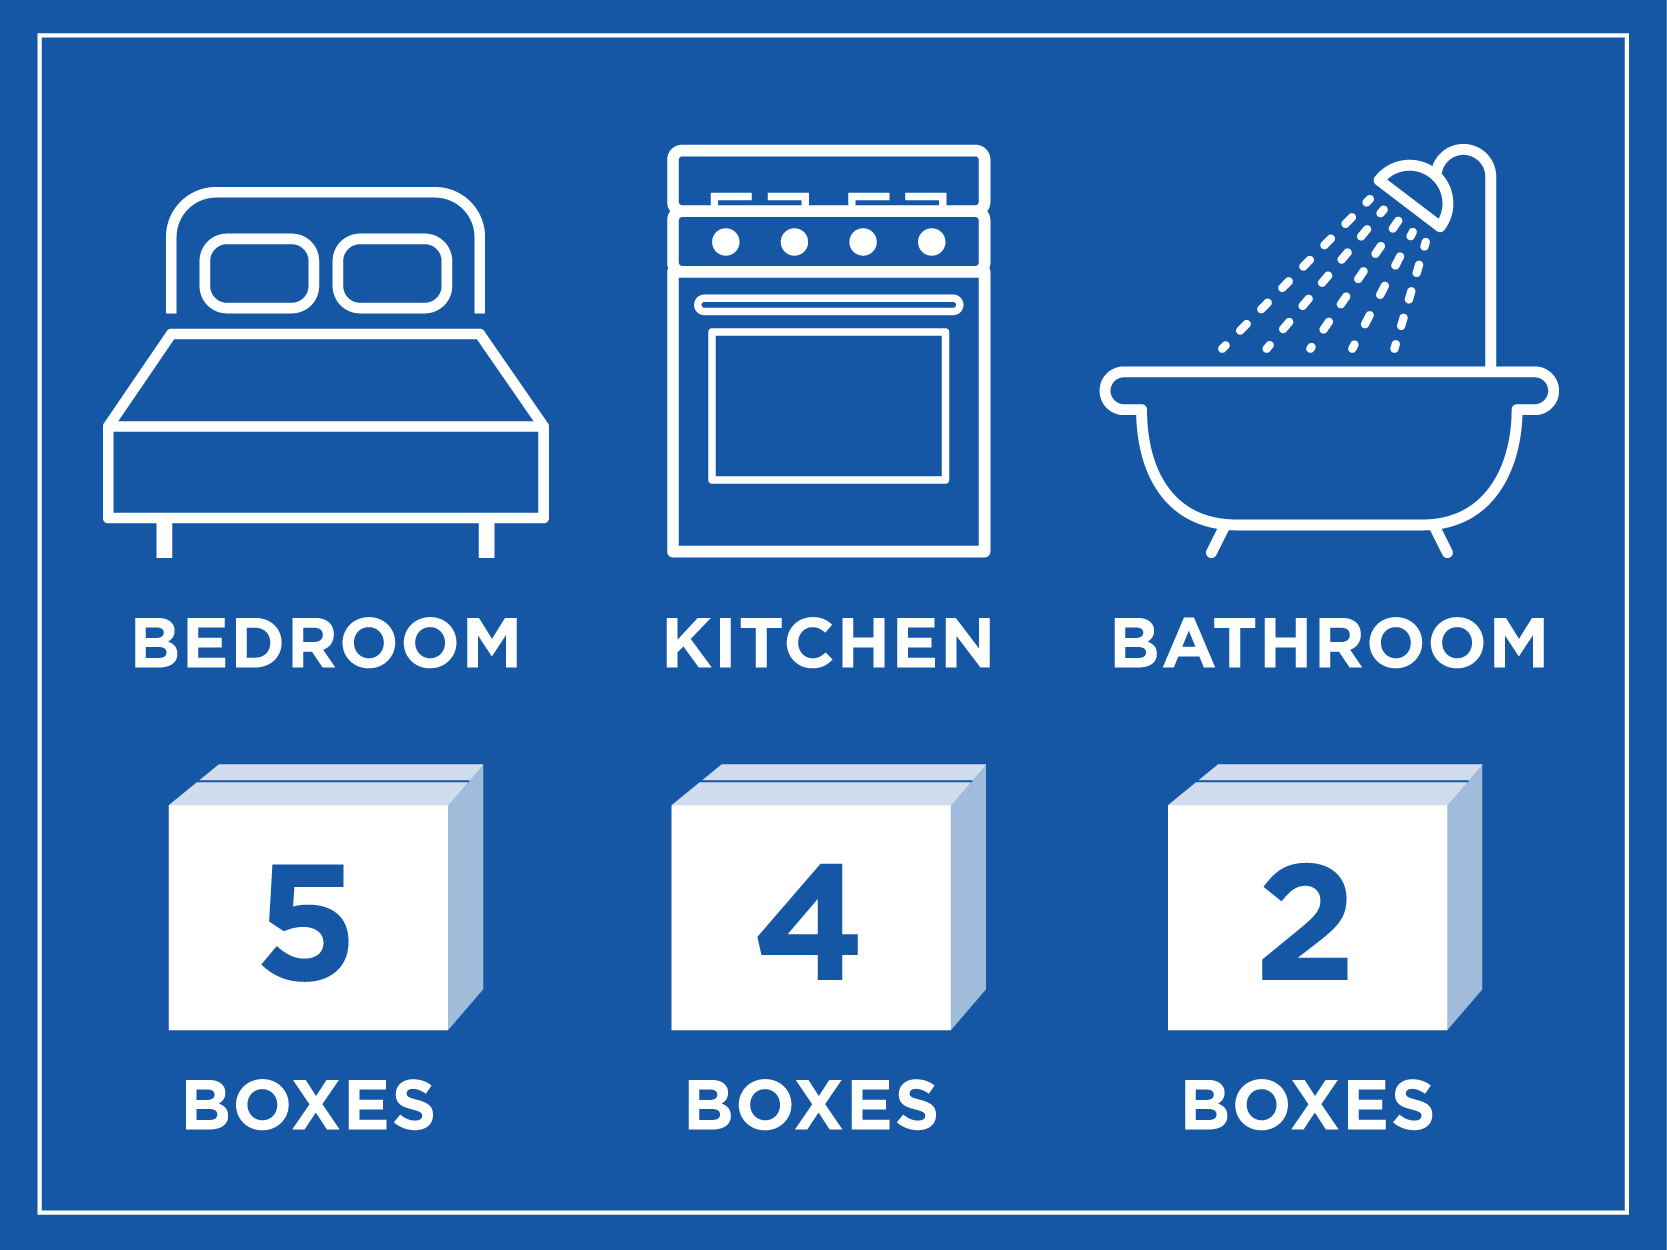 How to Pack a Bathroom for Moving